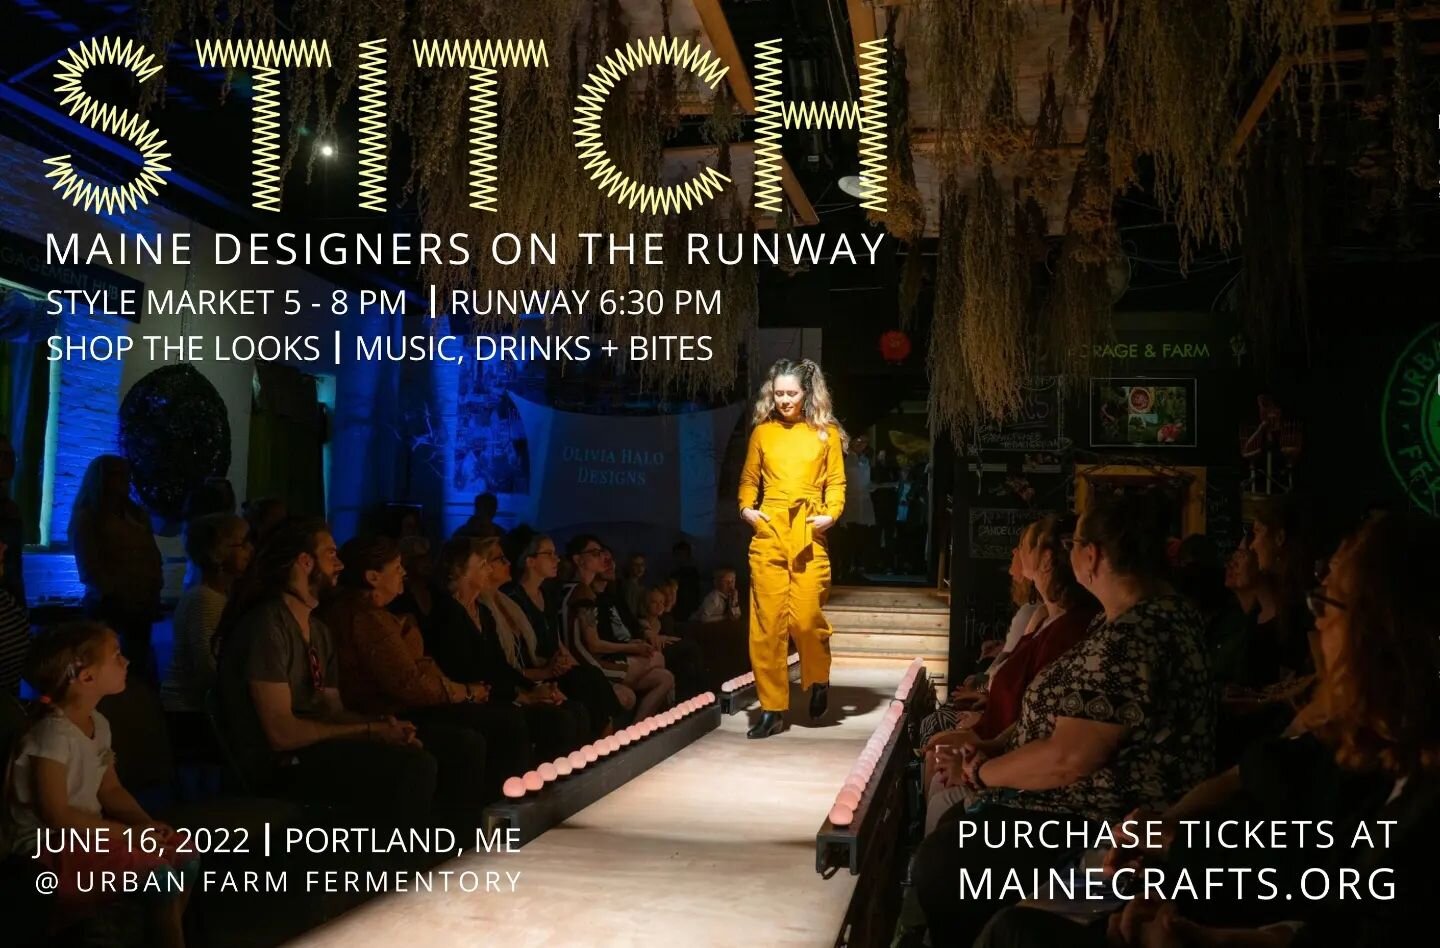 Join True Self artists at STITCH!

@maine_crafts_association has put together a killer show of Maine designers on the runway! Held at one of our favorite venues @fermentory (Urban Farm Fermentory), this is a show you don't want to miss!

Join True Se